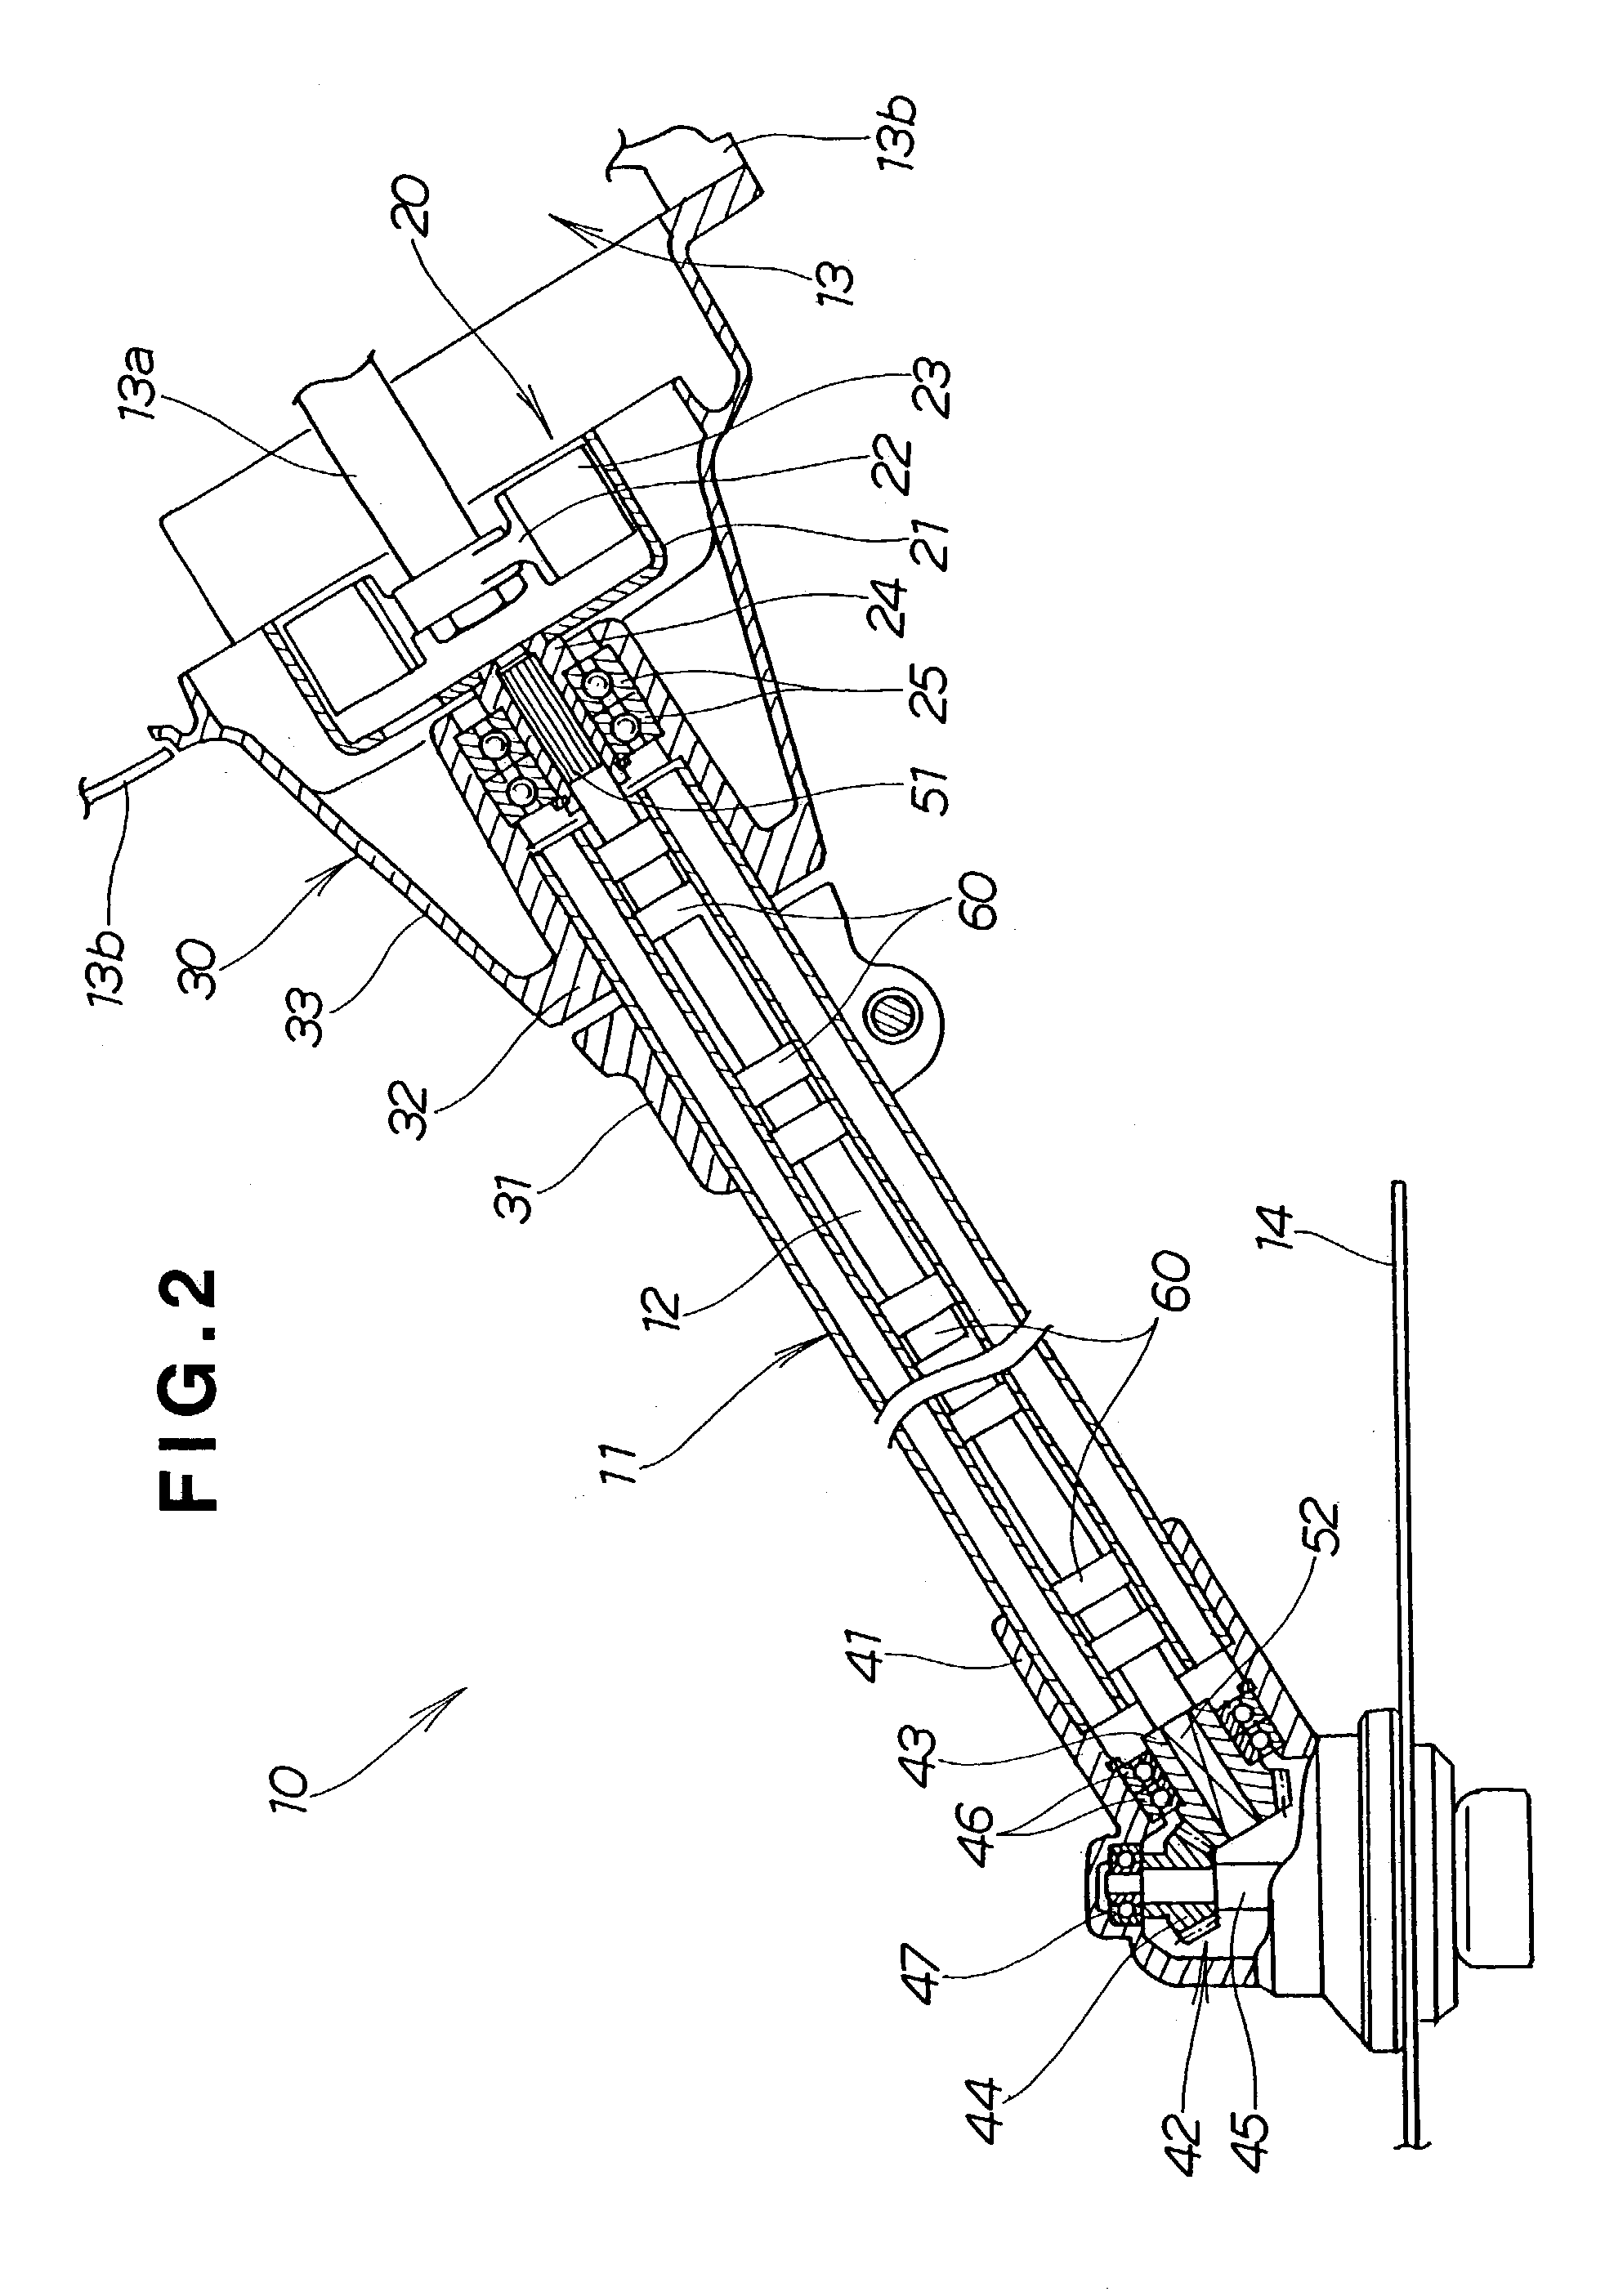 Drive shaft for use in portable working machine